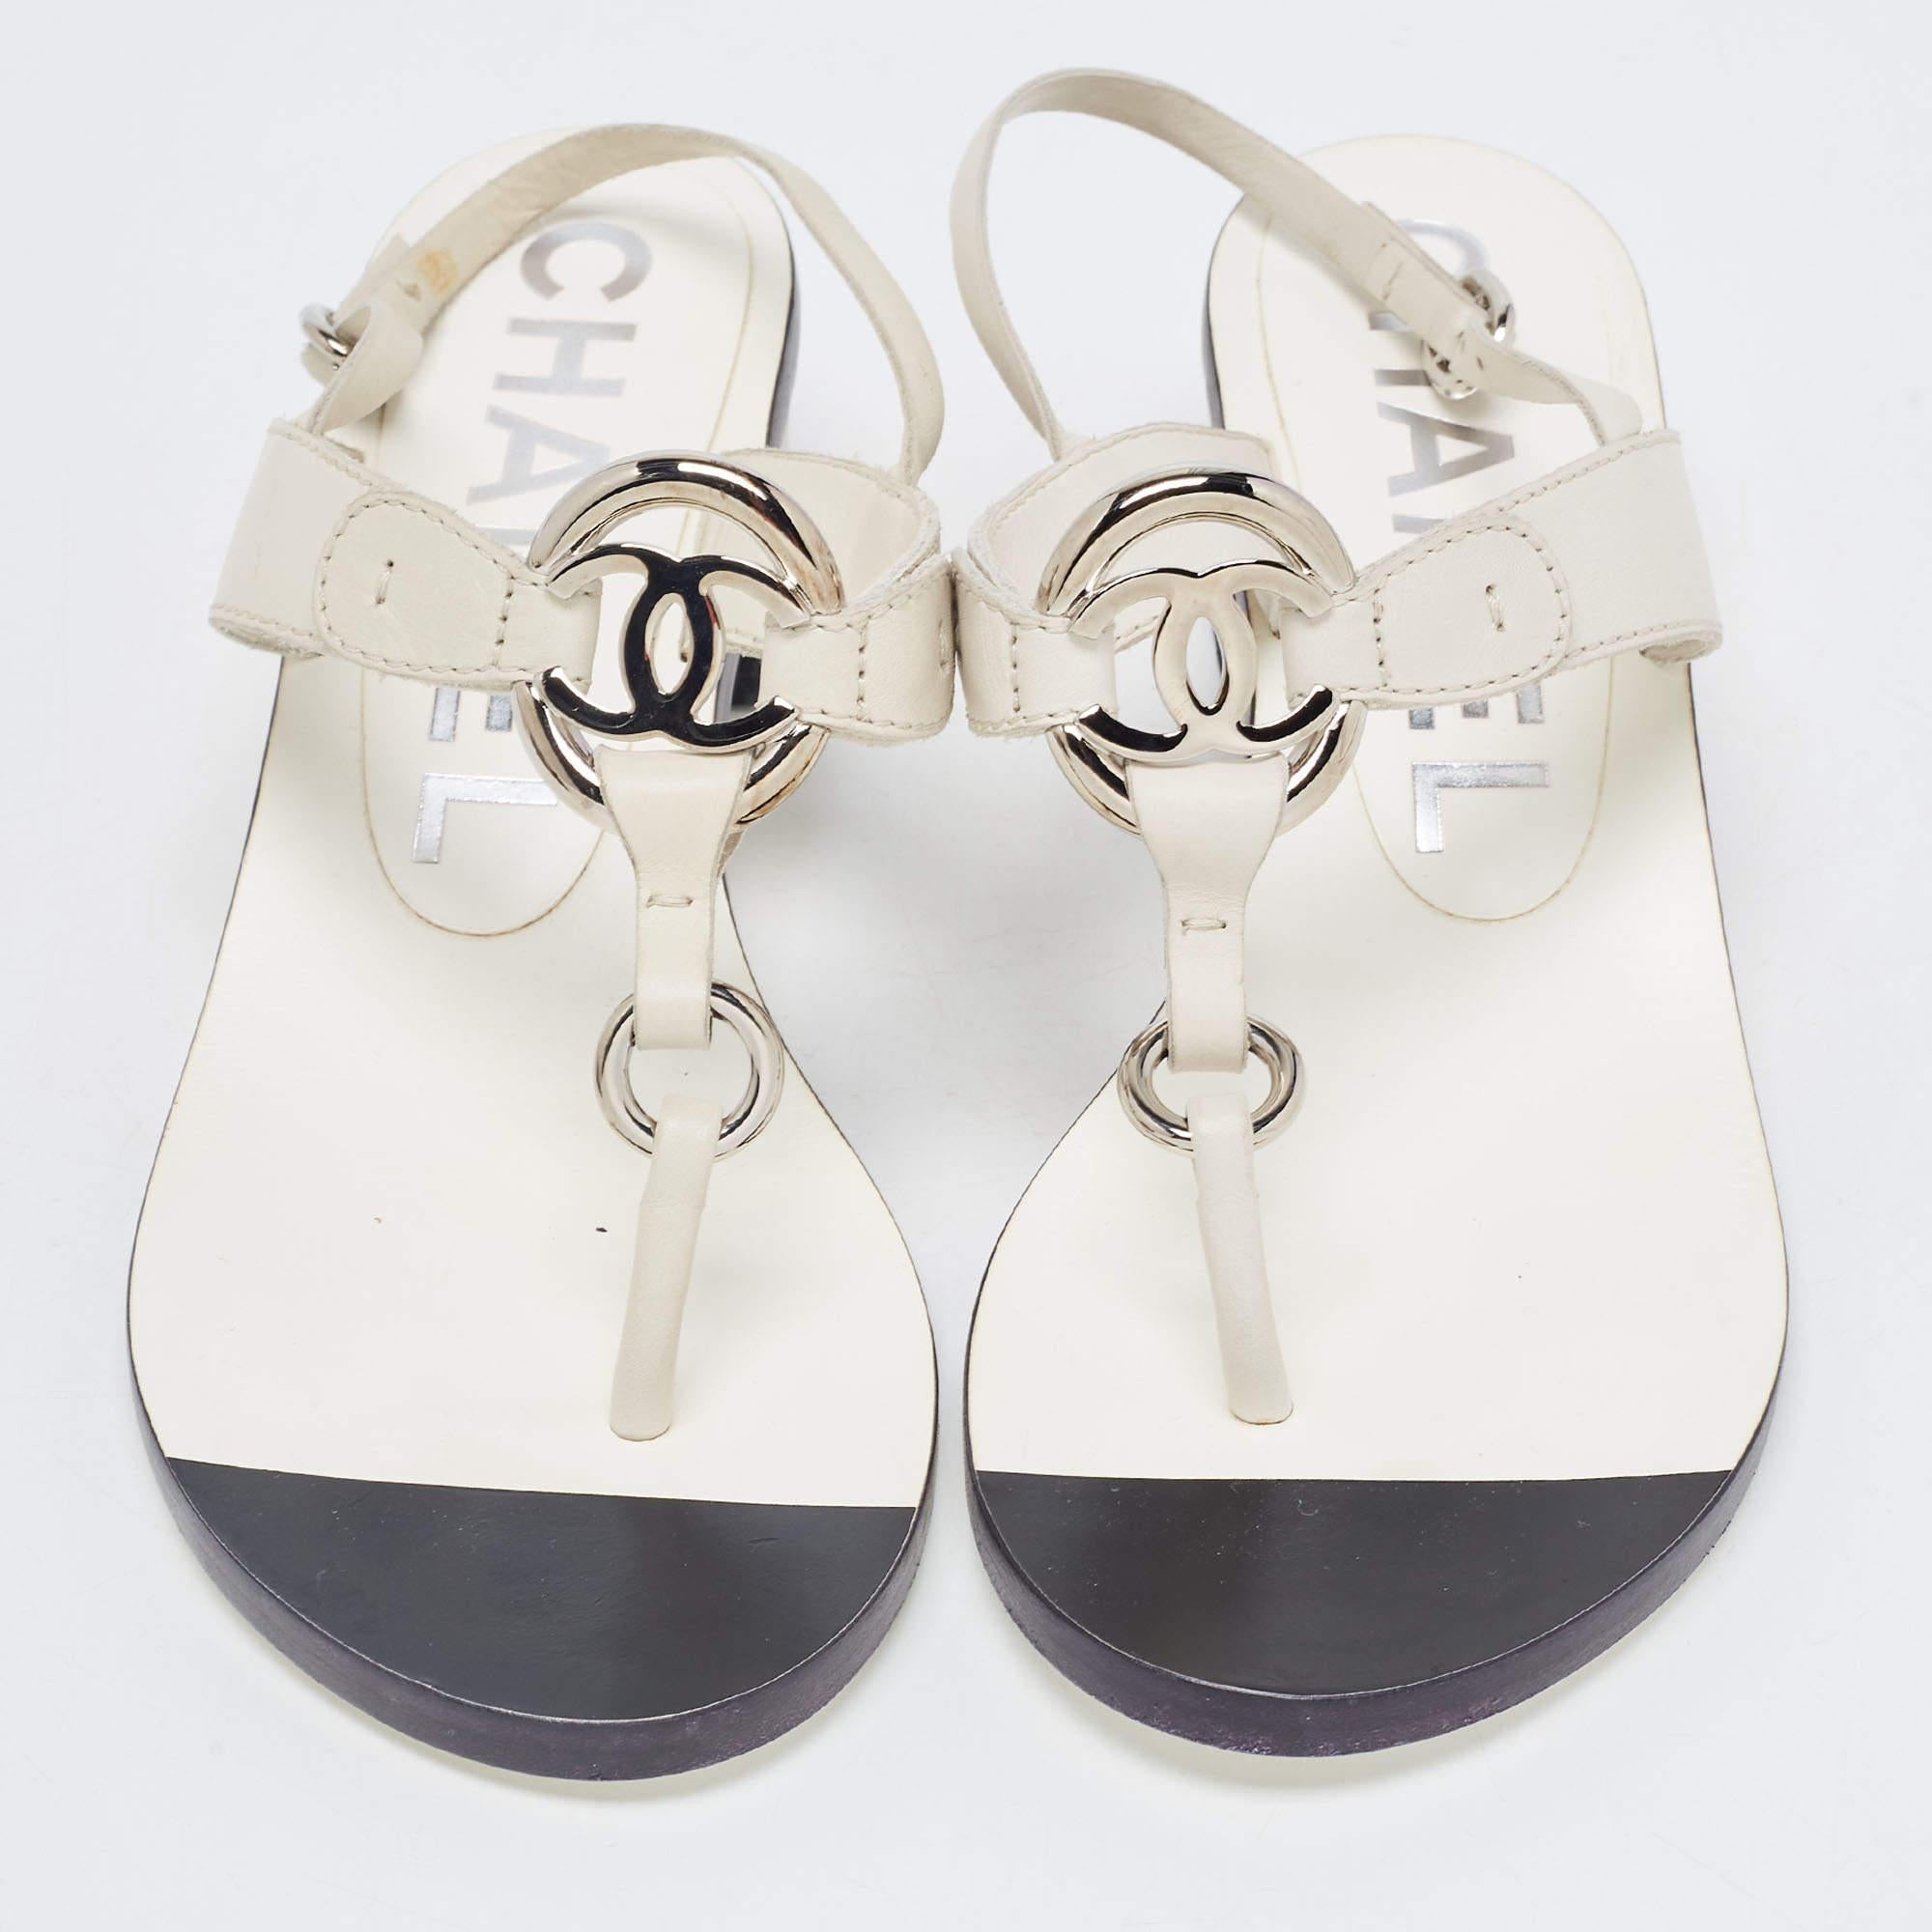 These Chanel sandals will offer you both luxury and comfort. Made from quality materials, they come in a classy white shade and are equipped with comfortable insoles.

Includes
Original Box, Original Dustbag